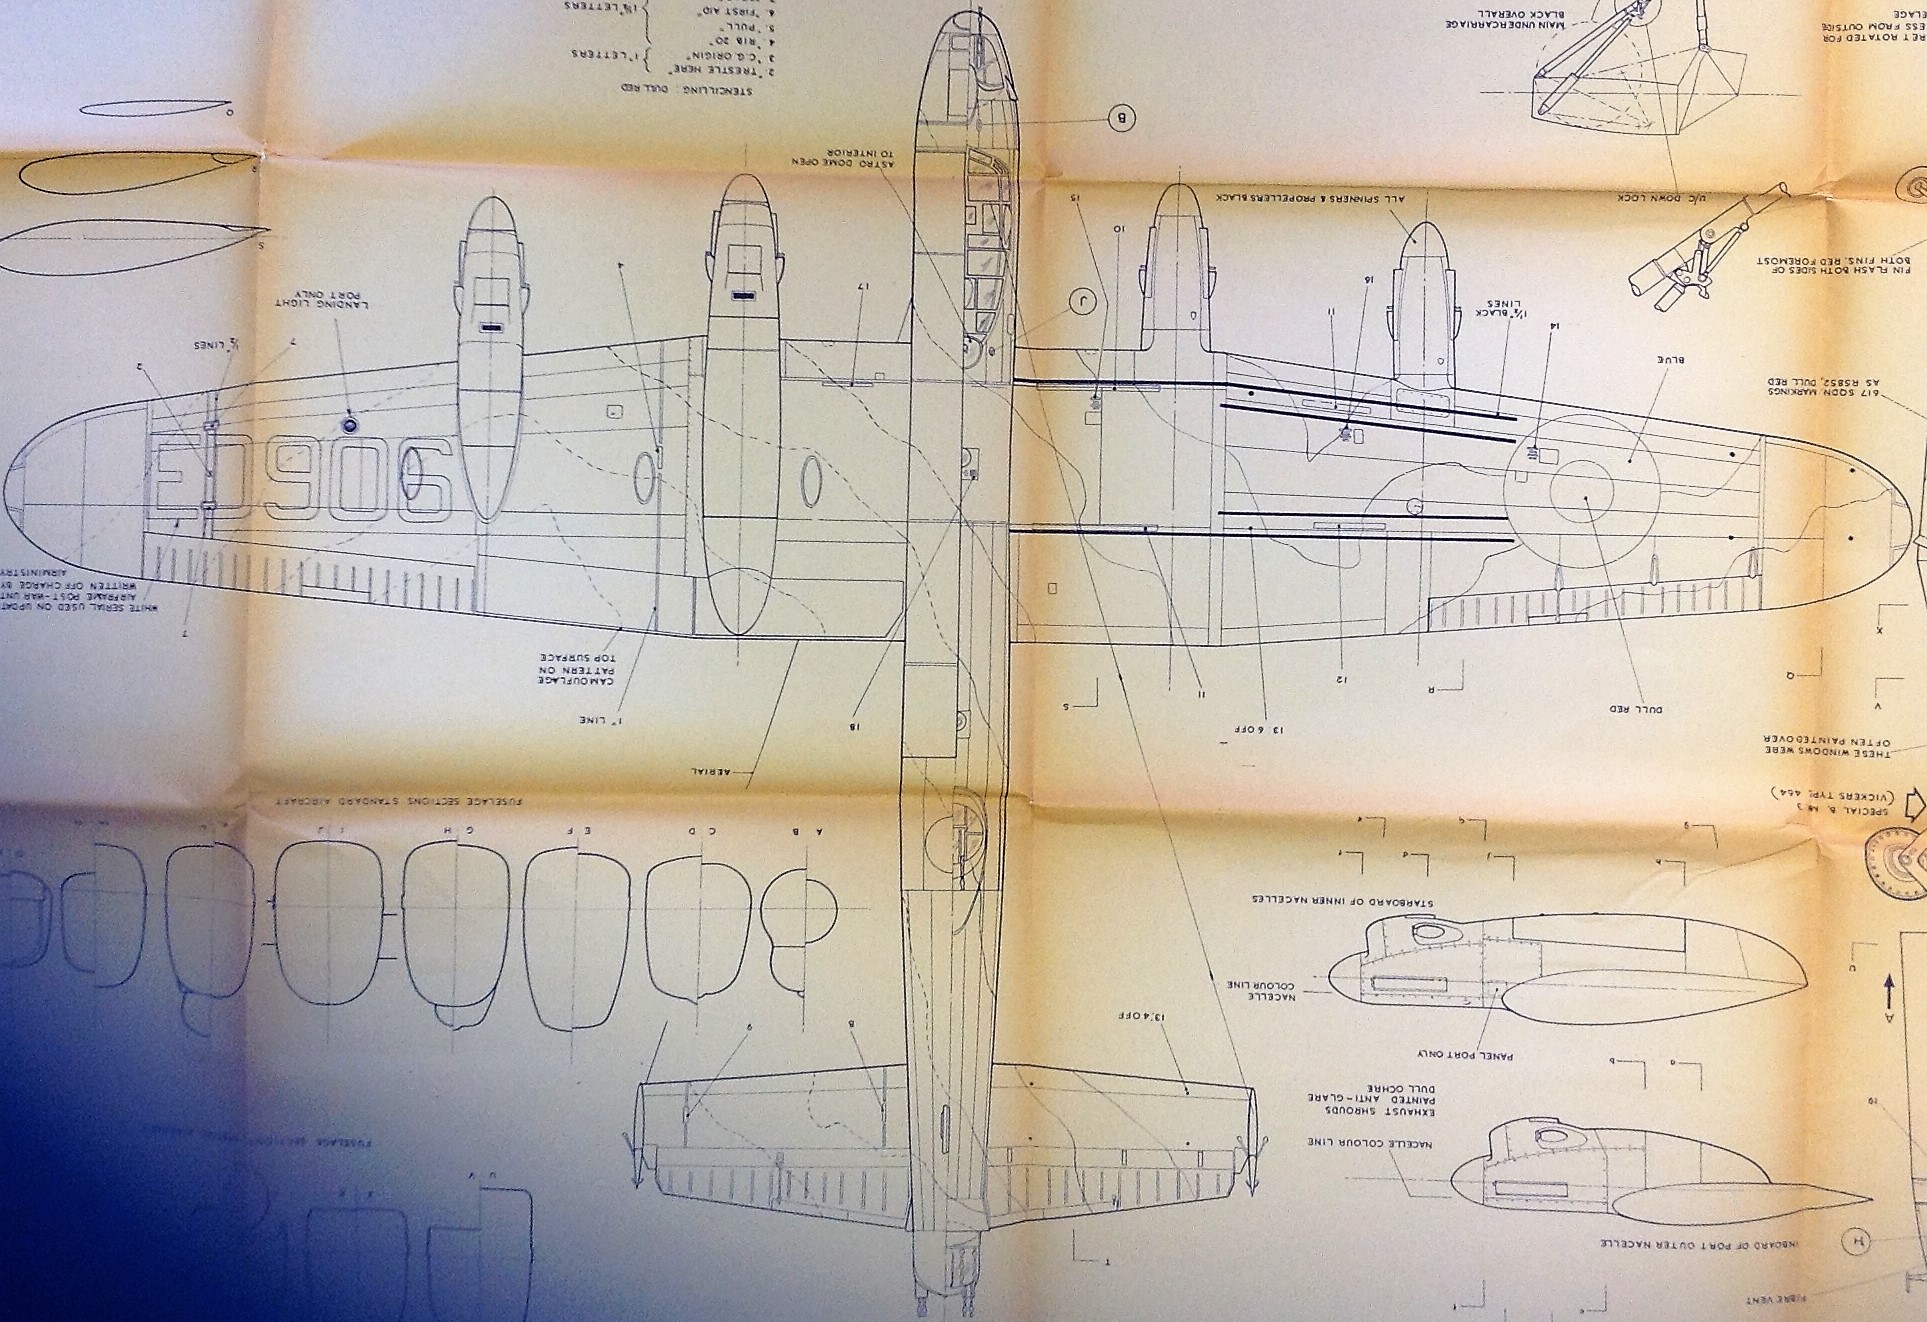 World War Two Avro Lancaster Bomber MK1 Spec detailed drawings of the iconic world war Two bomber. - Image 4 of 4